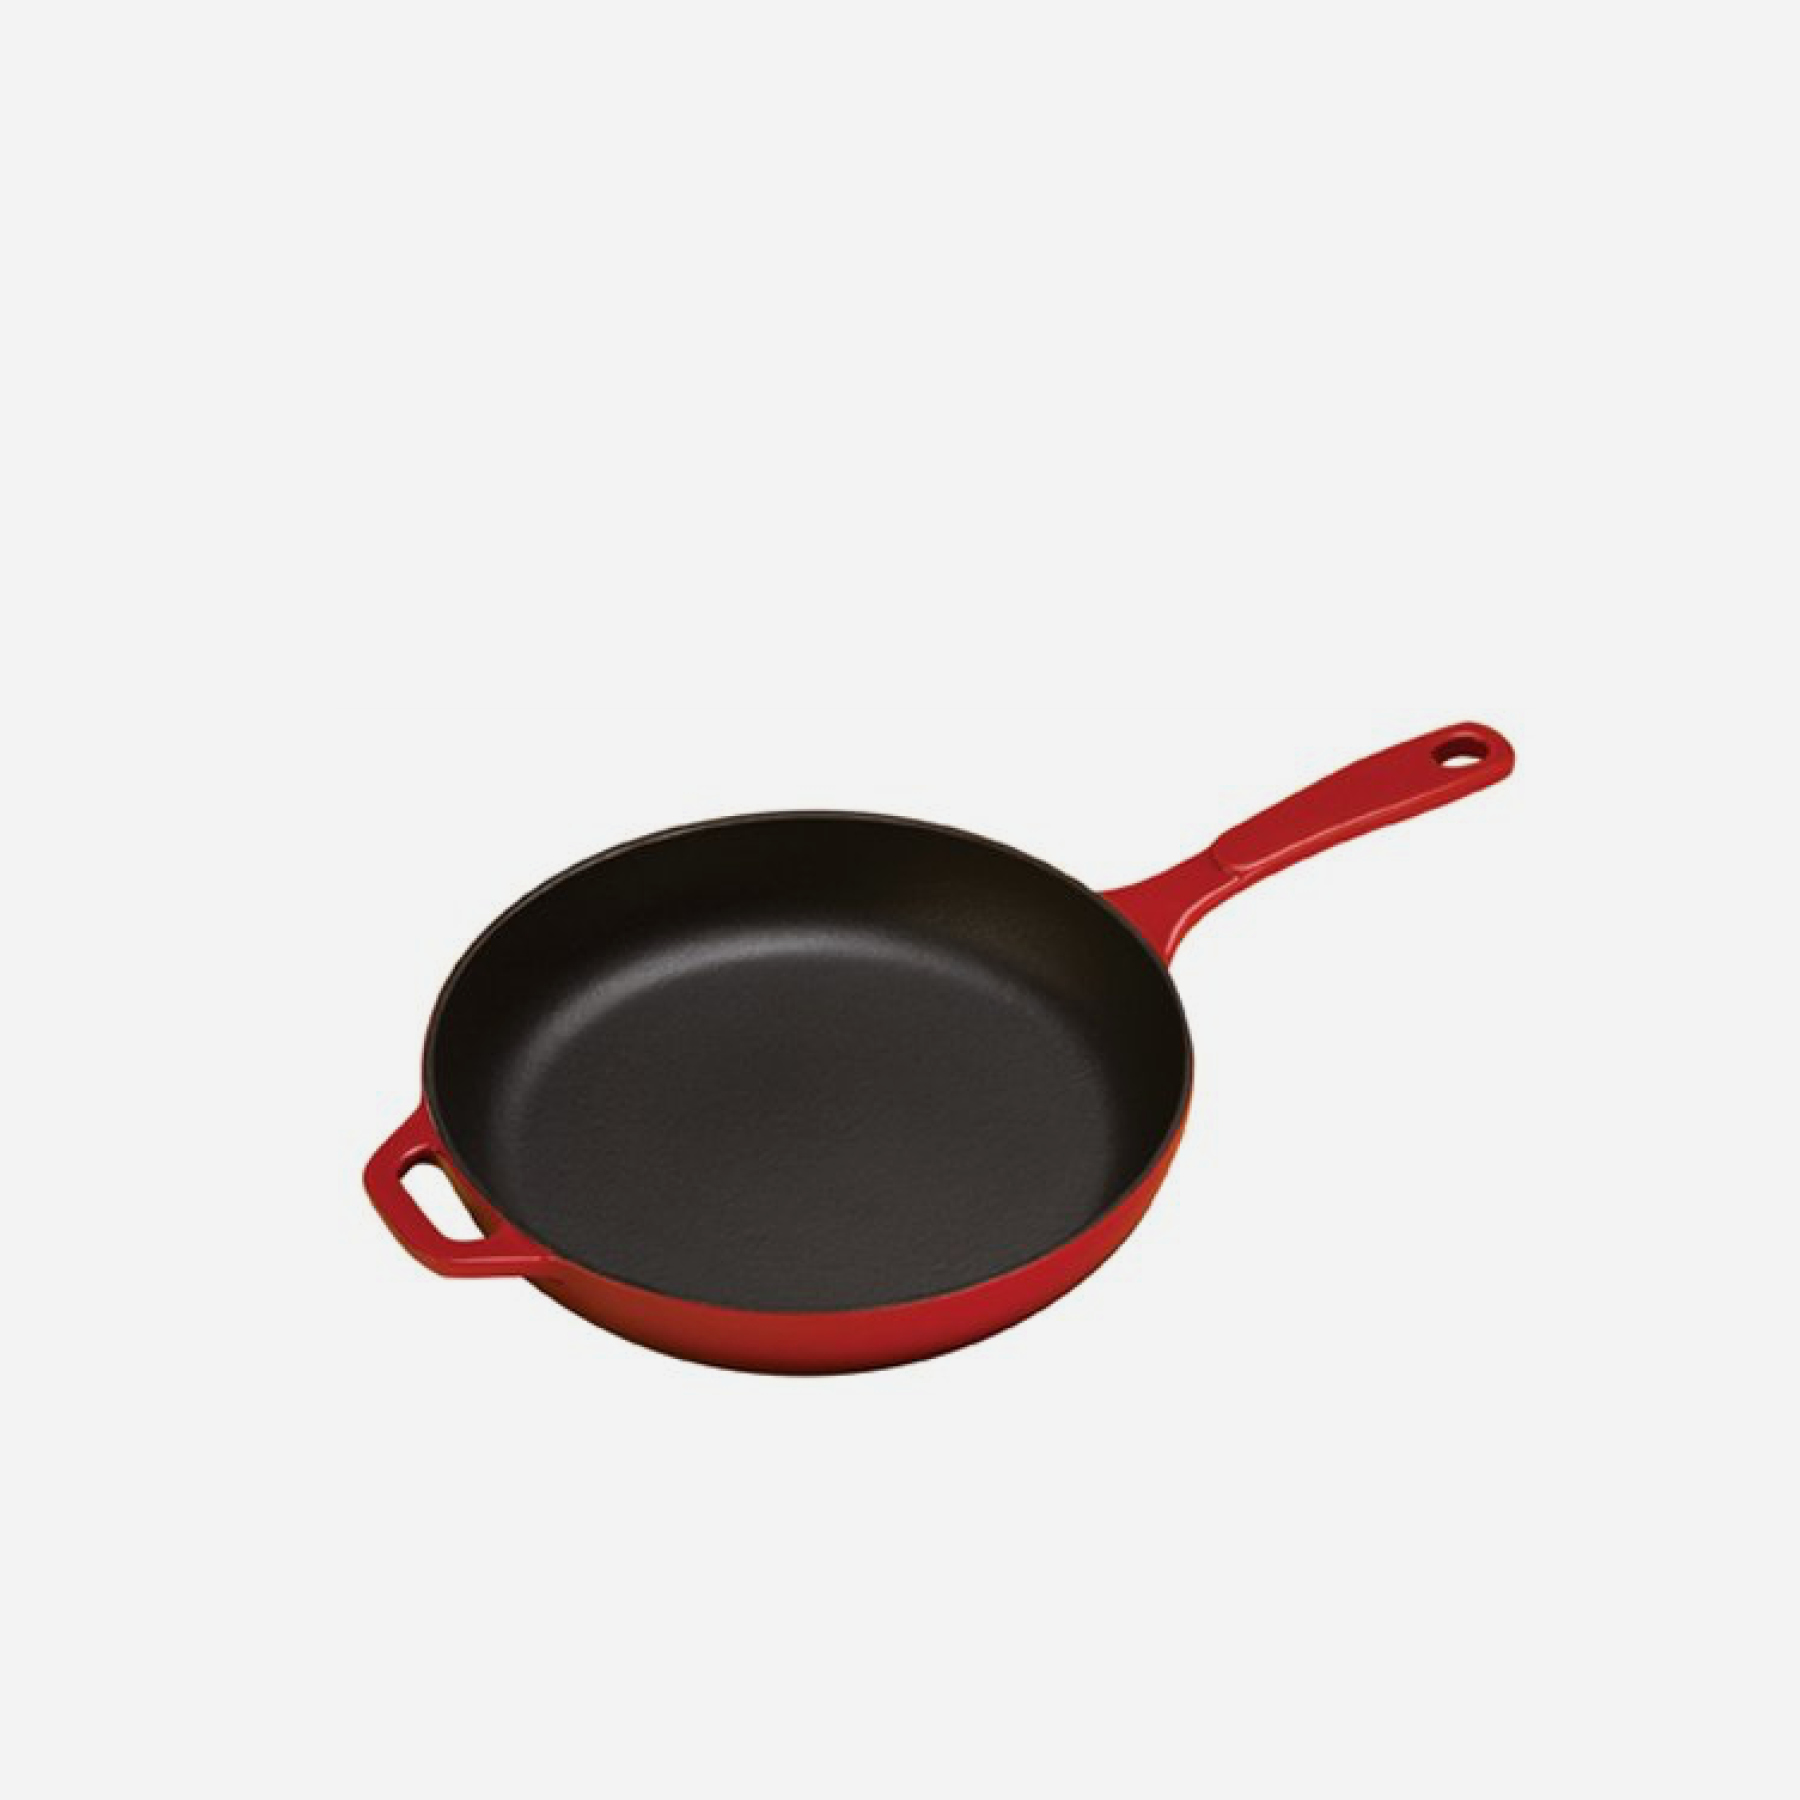 ALL-SORTS-OF-LODGE-CAST-IRON-SKILLET